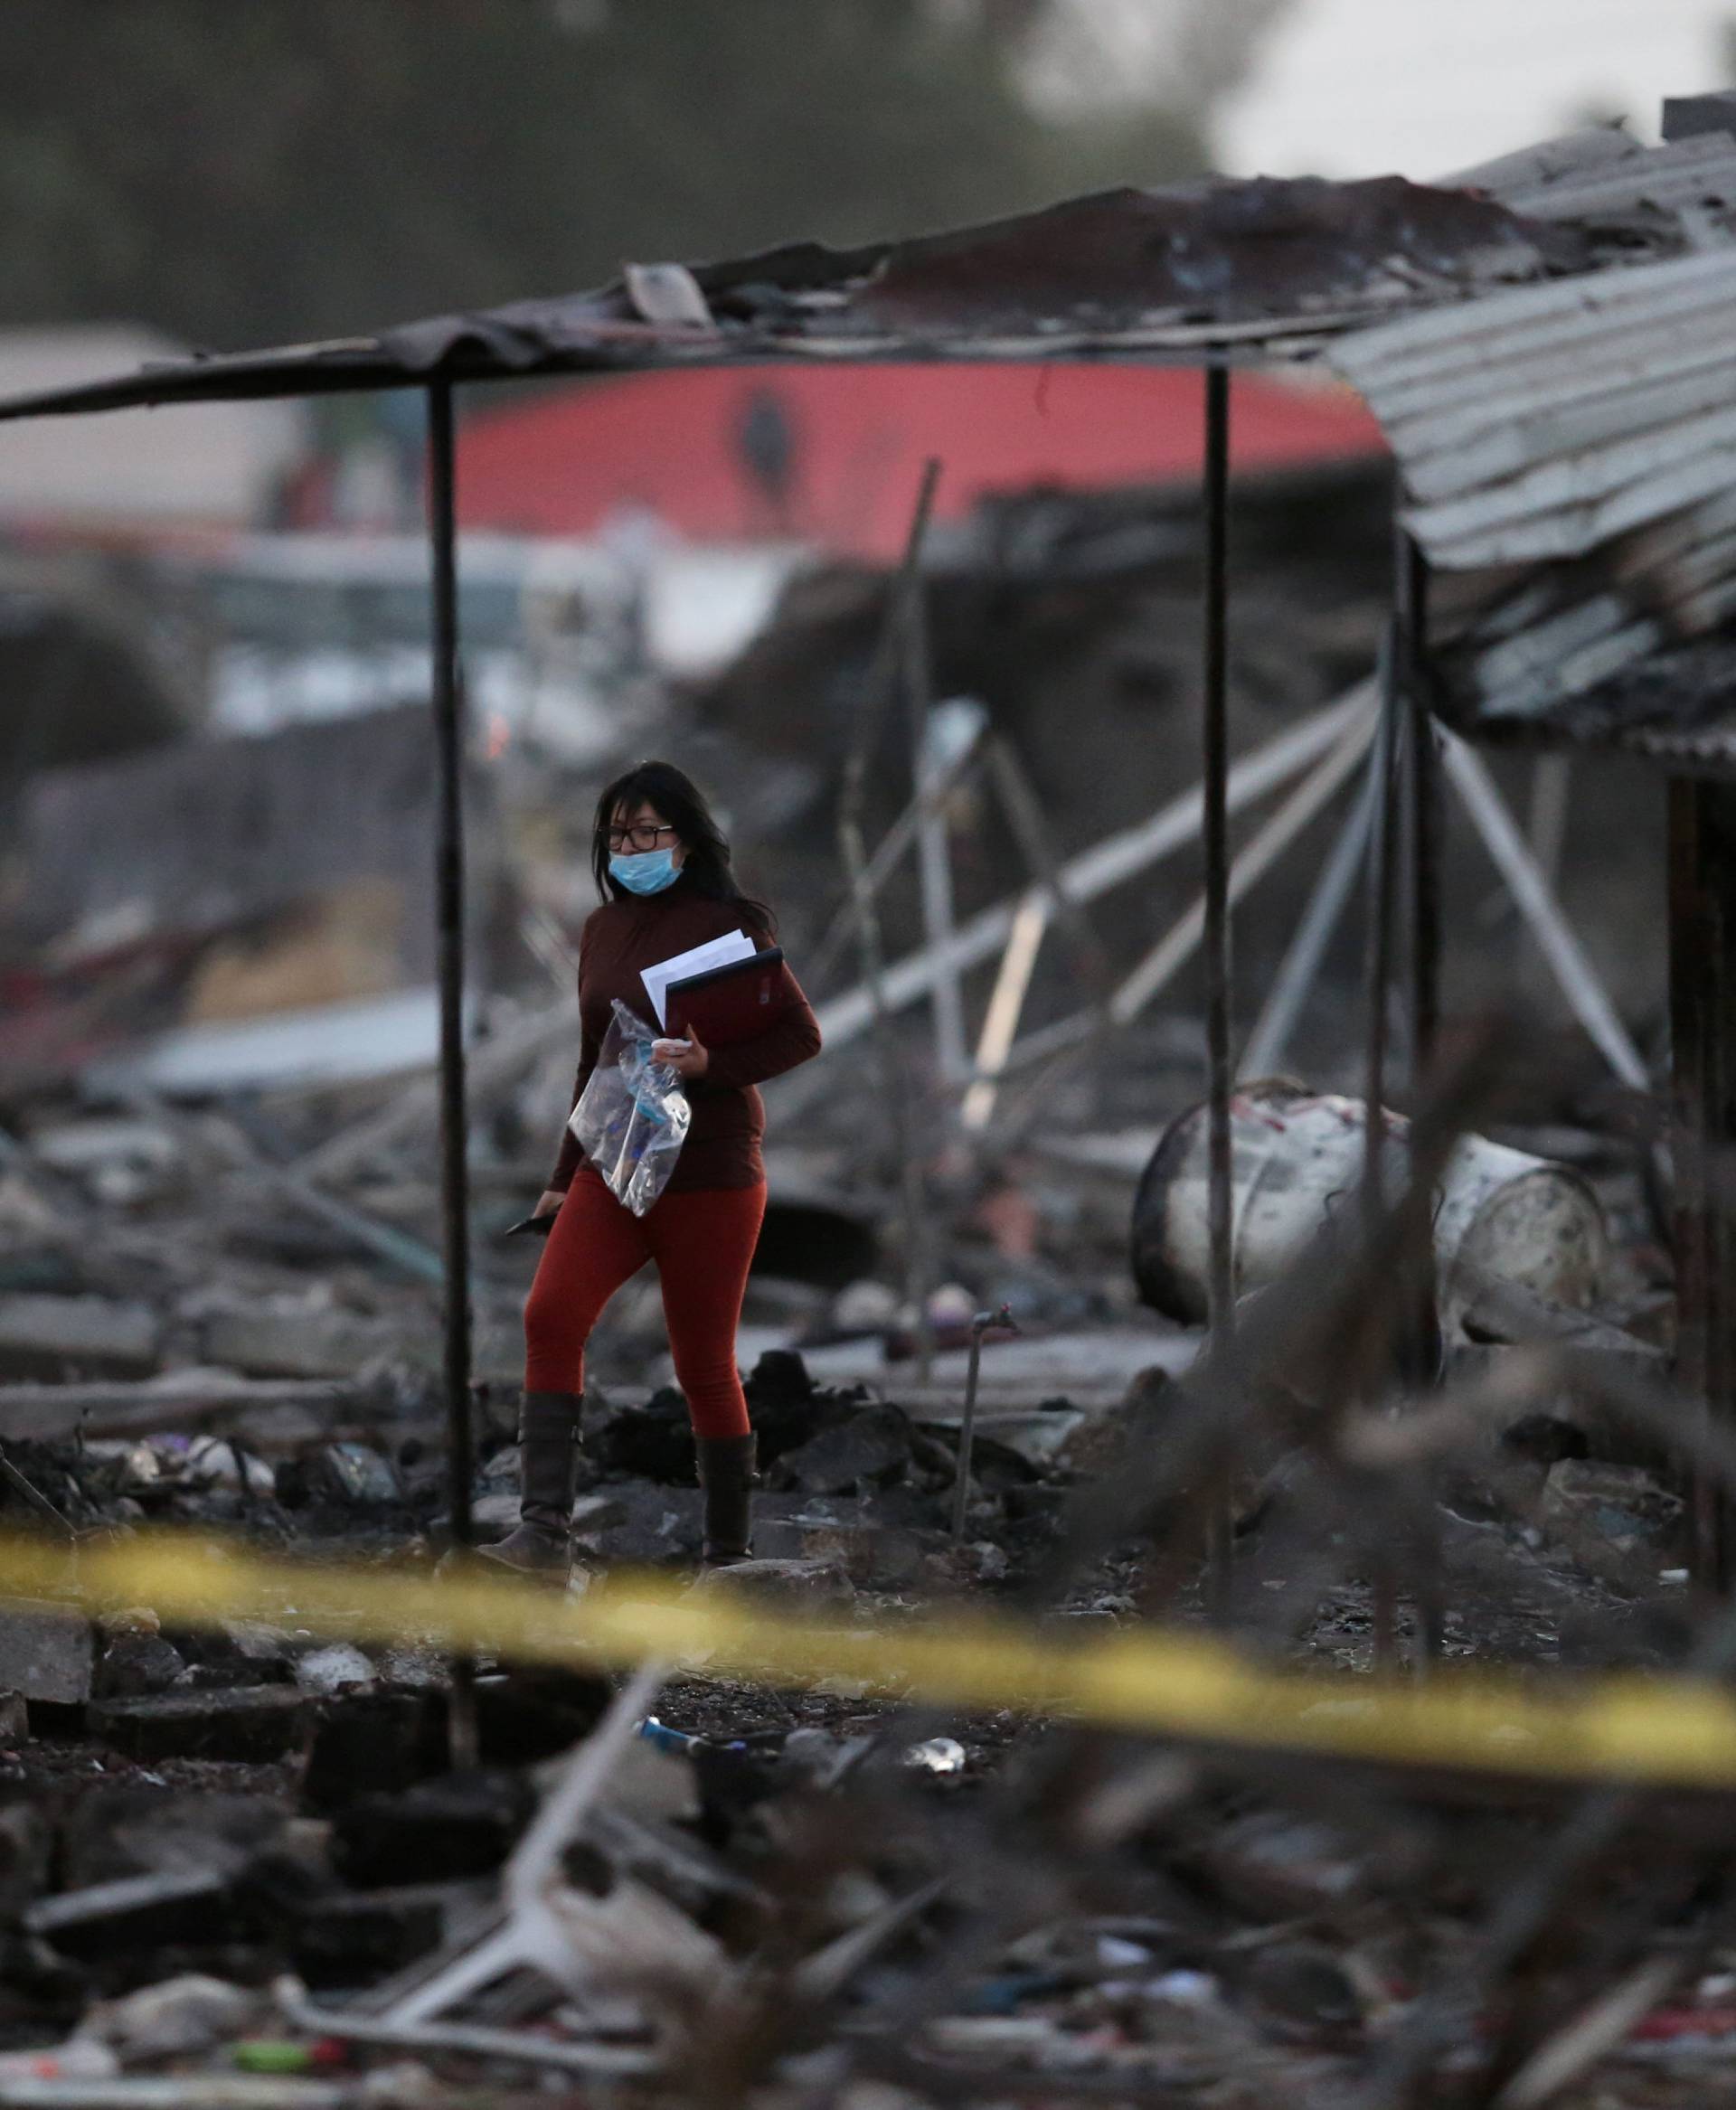 A woman walks amidst the remains of houses destroyed in an explosion at the San Pablito fireworks market in Tultepec